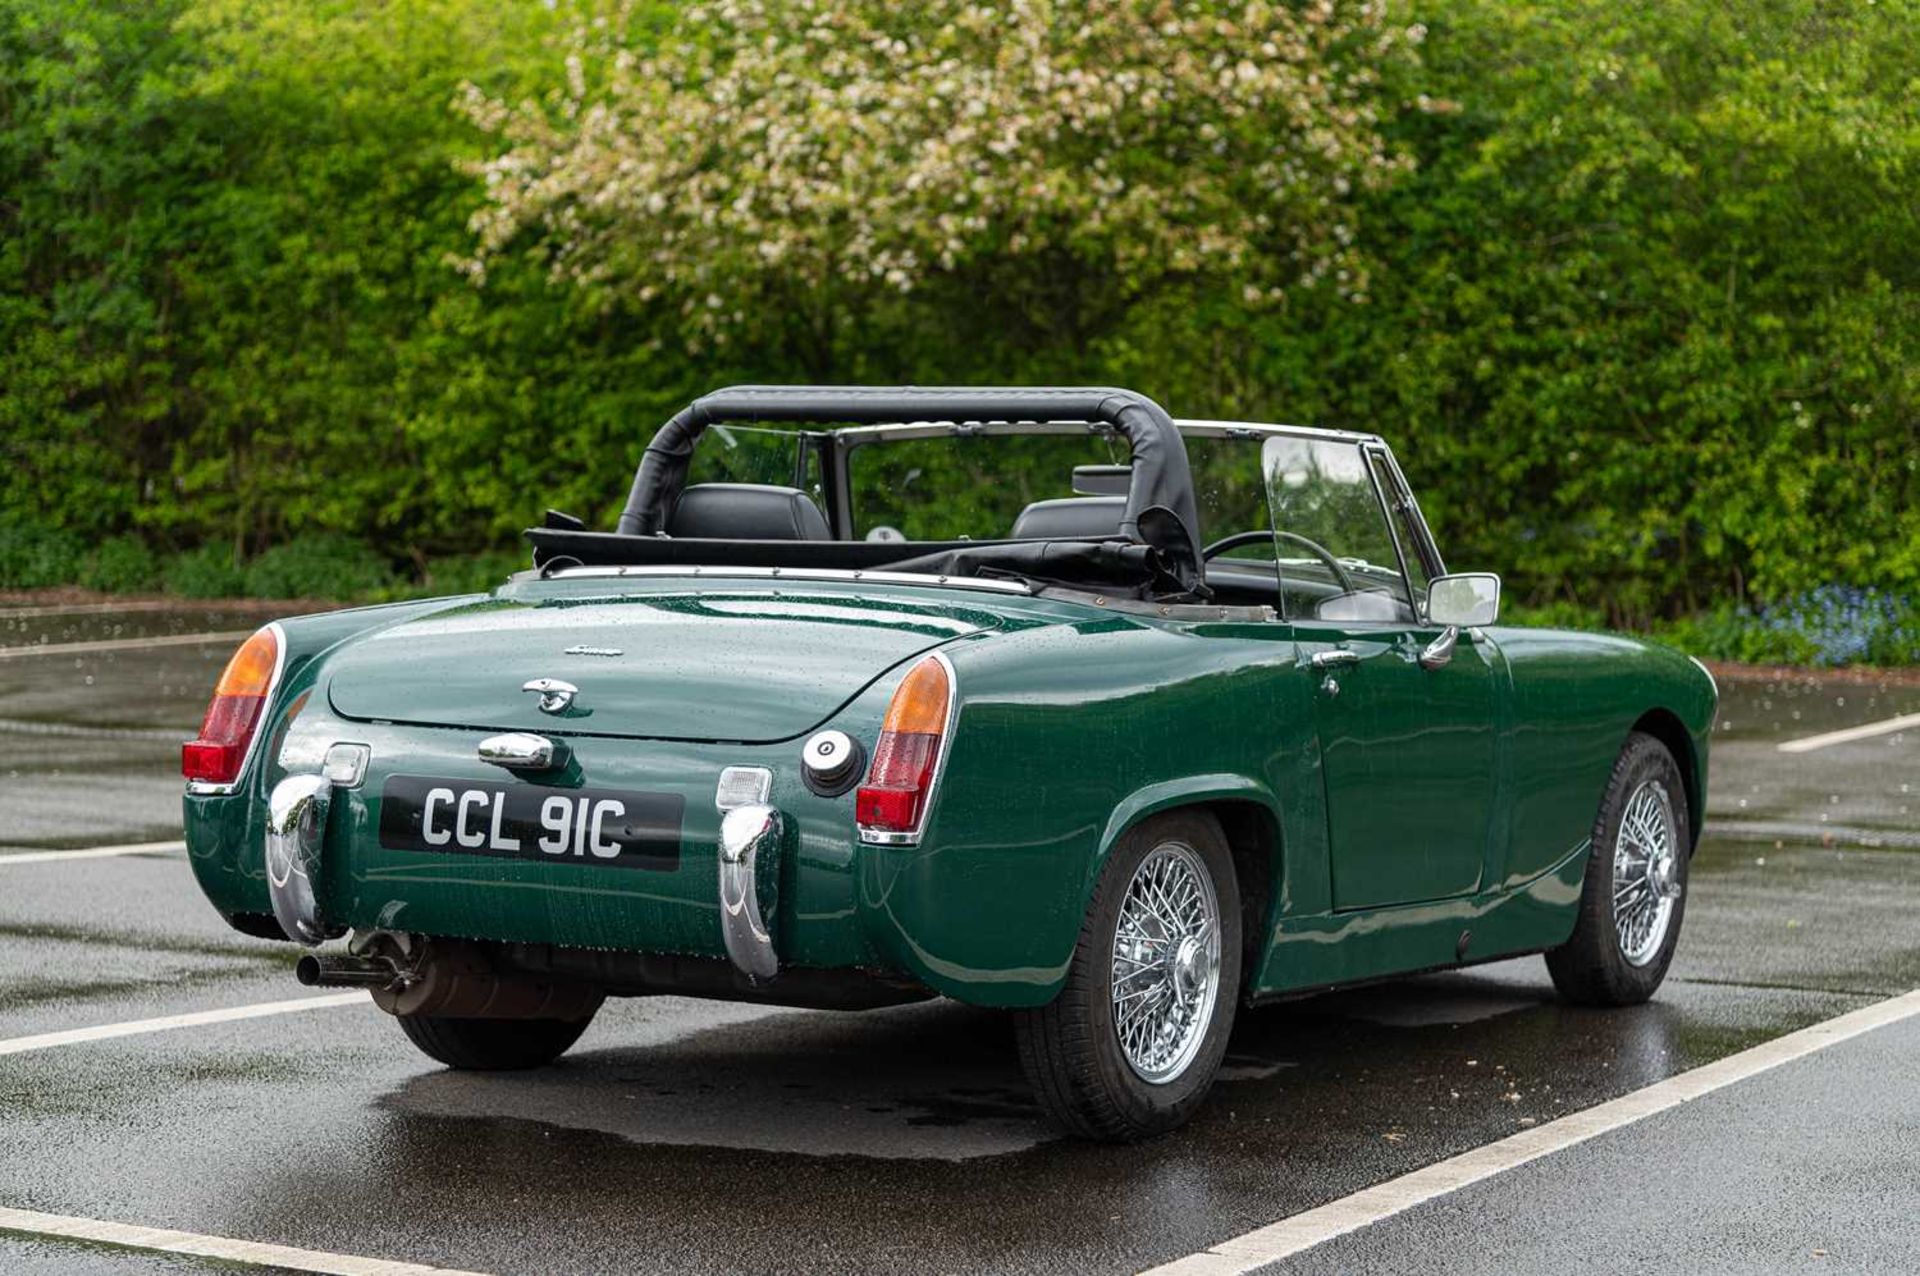 1965 Austin-Healey Sprite Formerly the property of British Formula One racing driver David Piper - Image 13 of 71